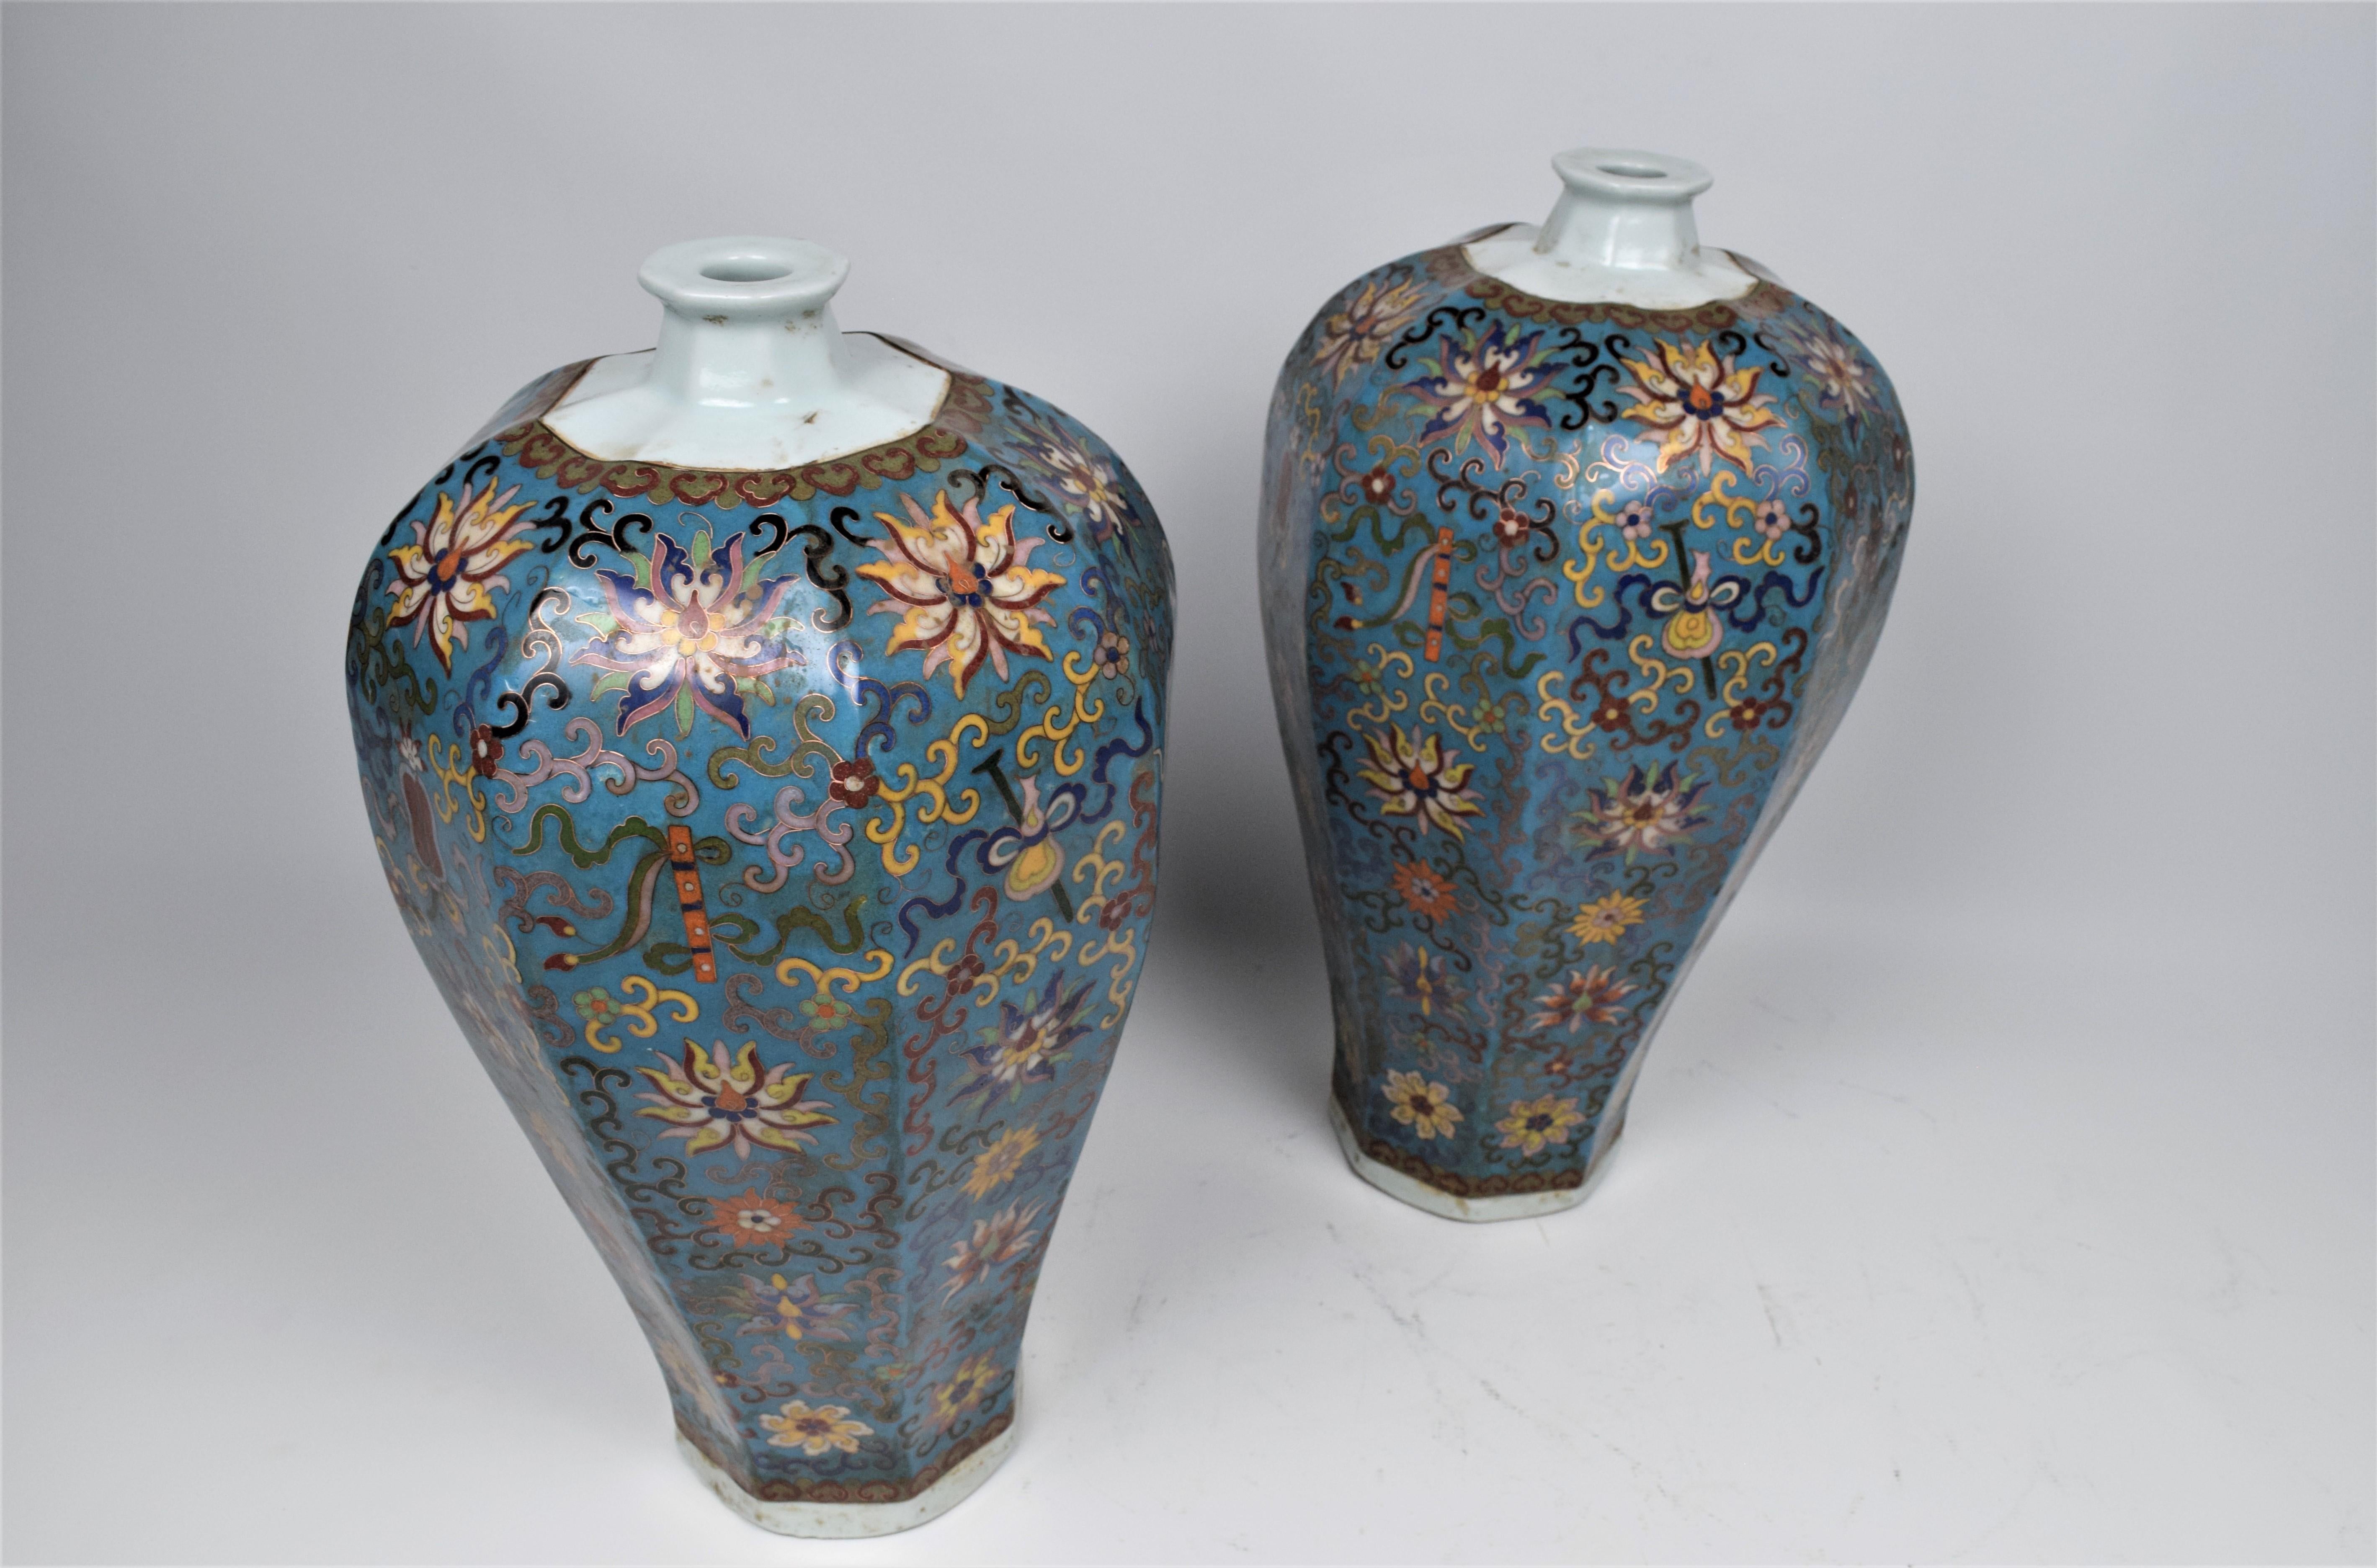 Chinese Large Cloisonné Enamel Bottle Vases Late Qing Dynasty, 19th Century In Good Condition For Sale In Islamabad, PK